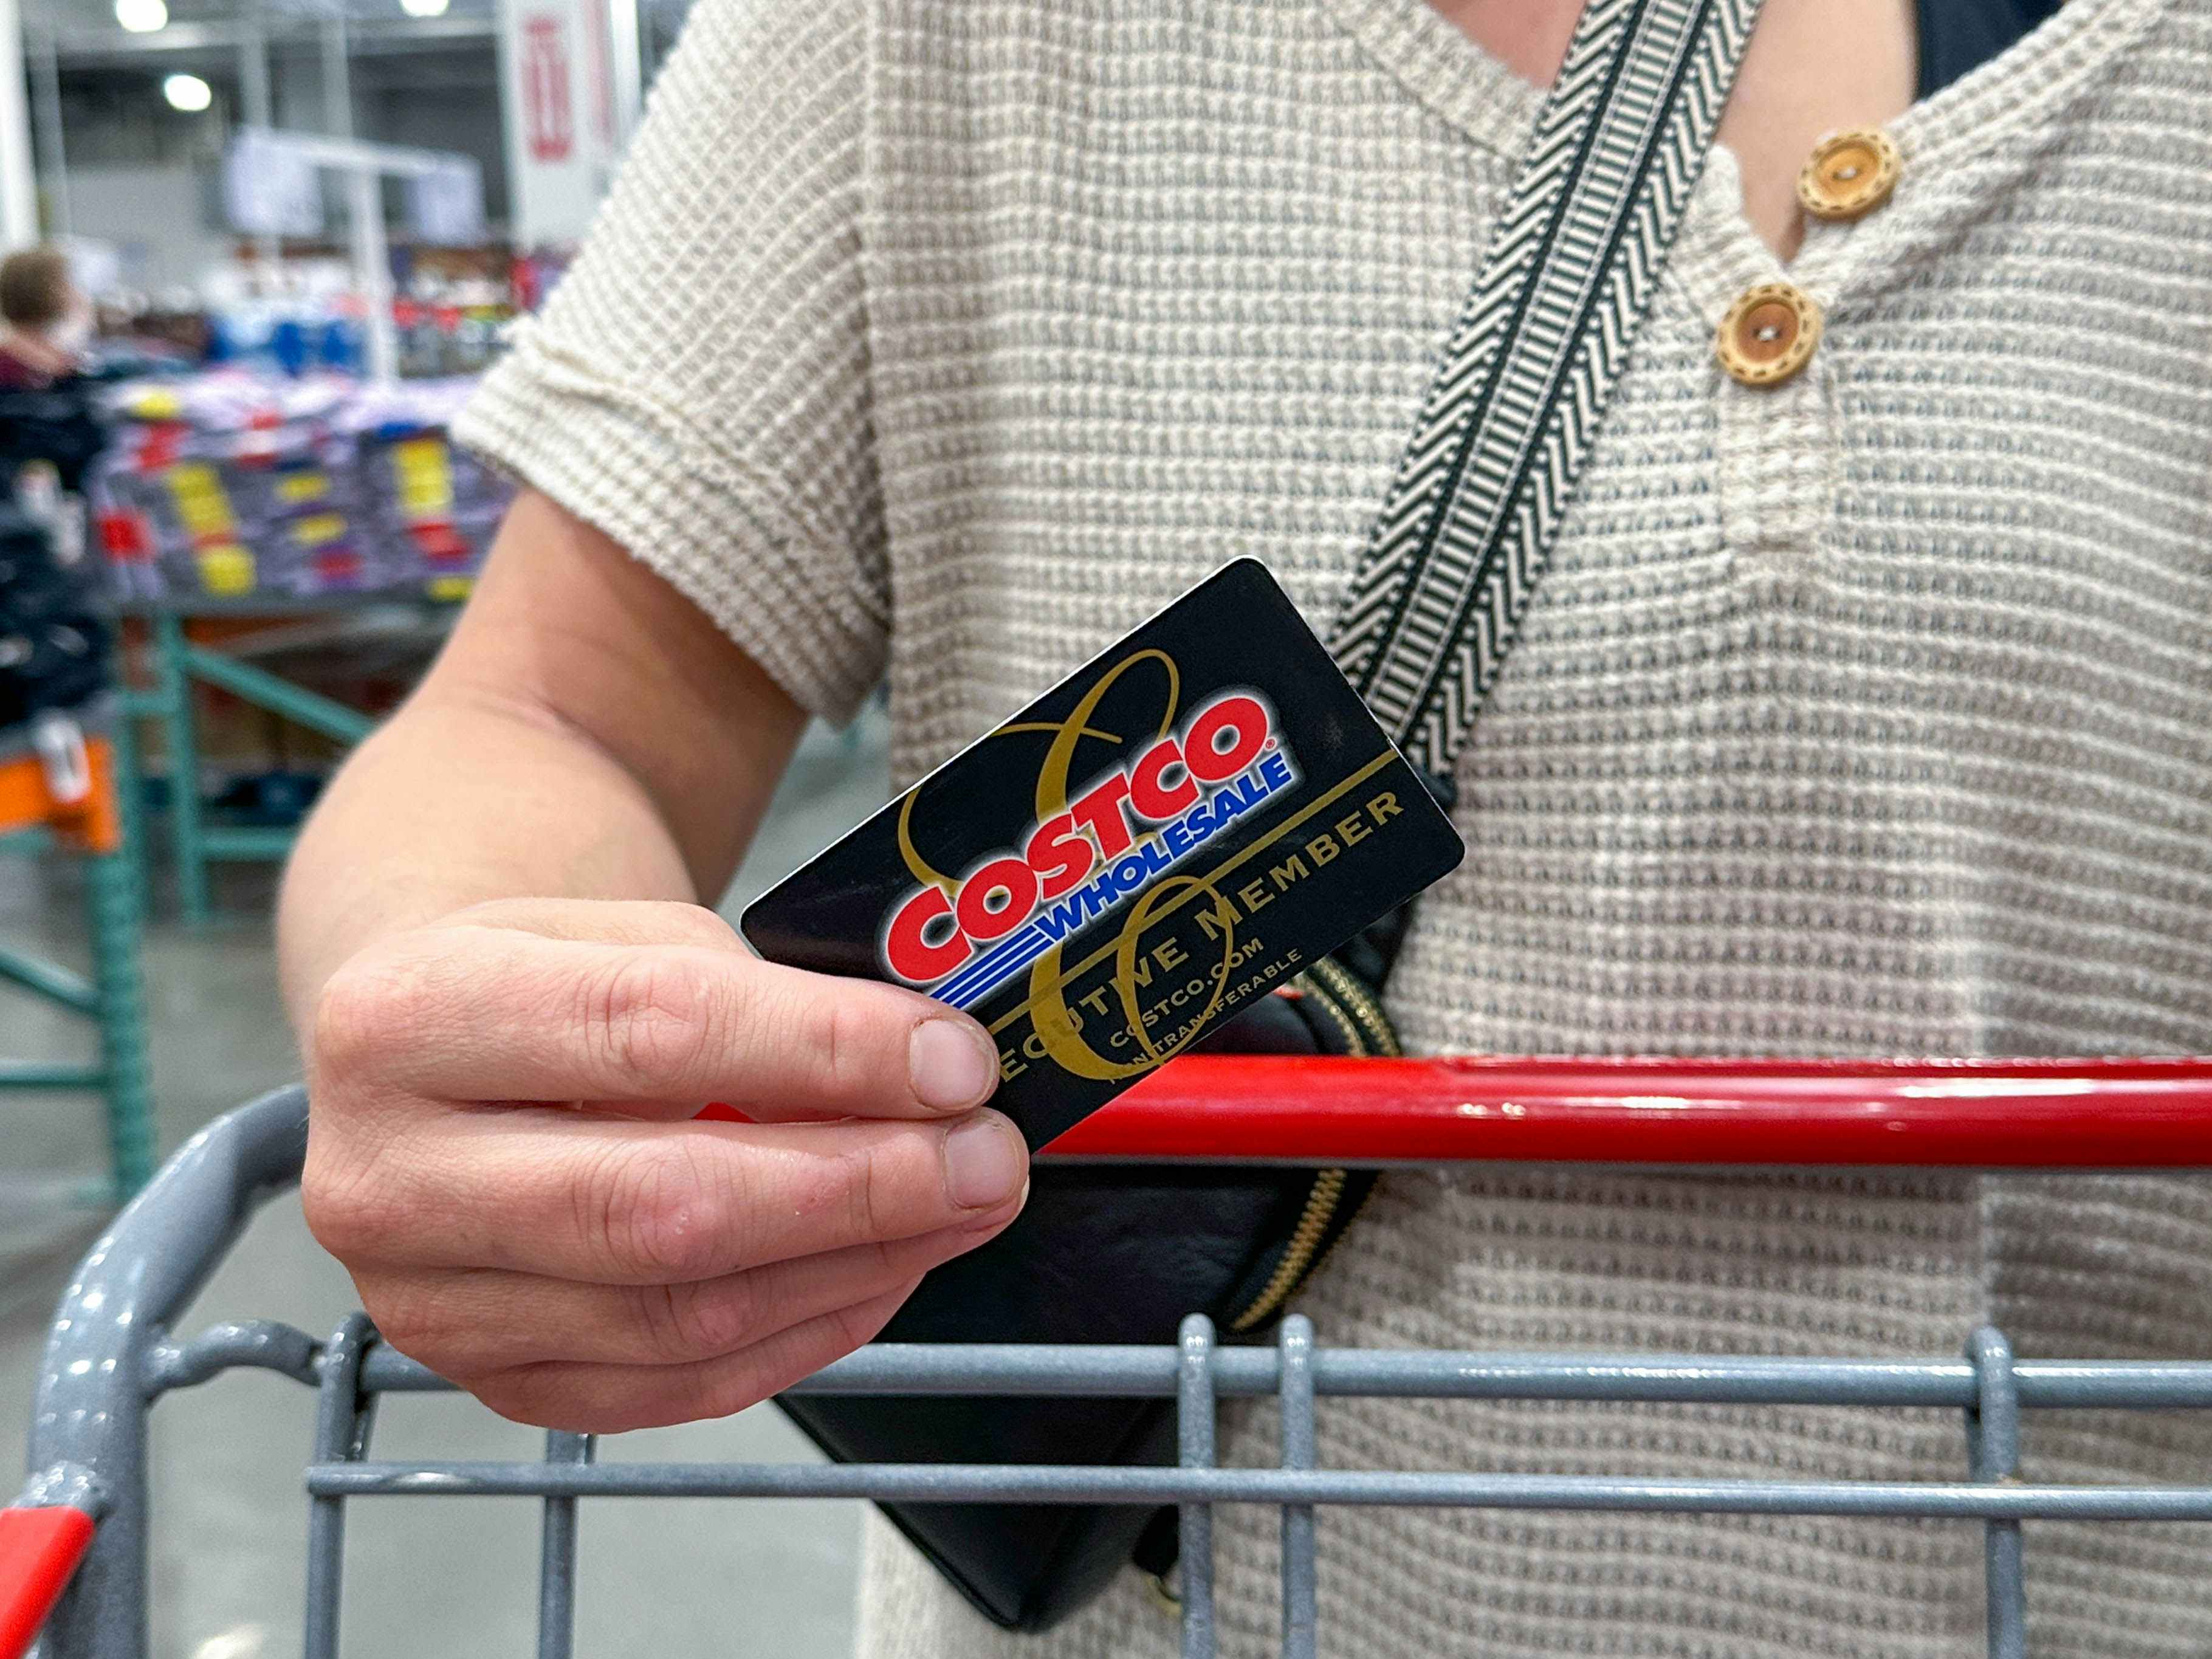 a person holding a costco cart while psuhing cart